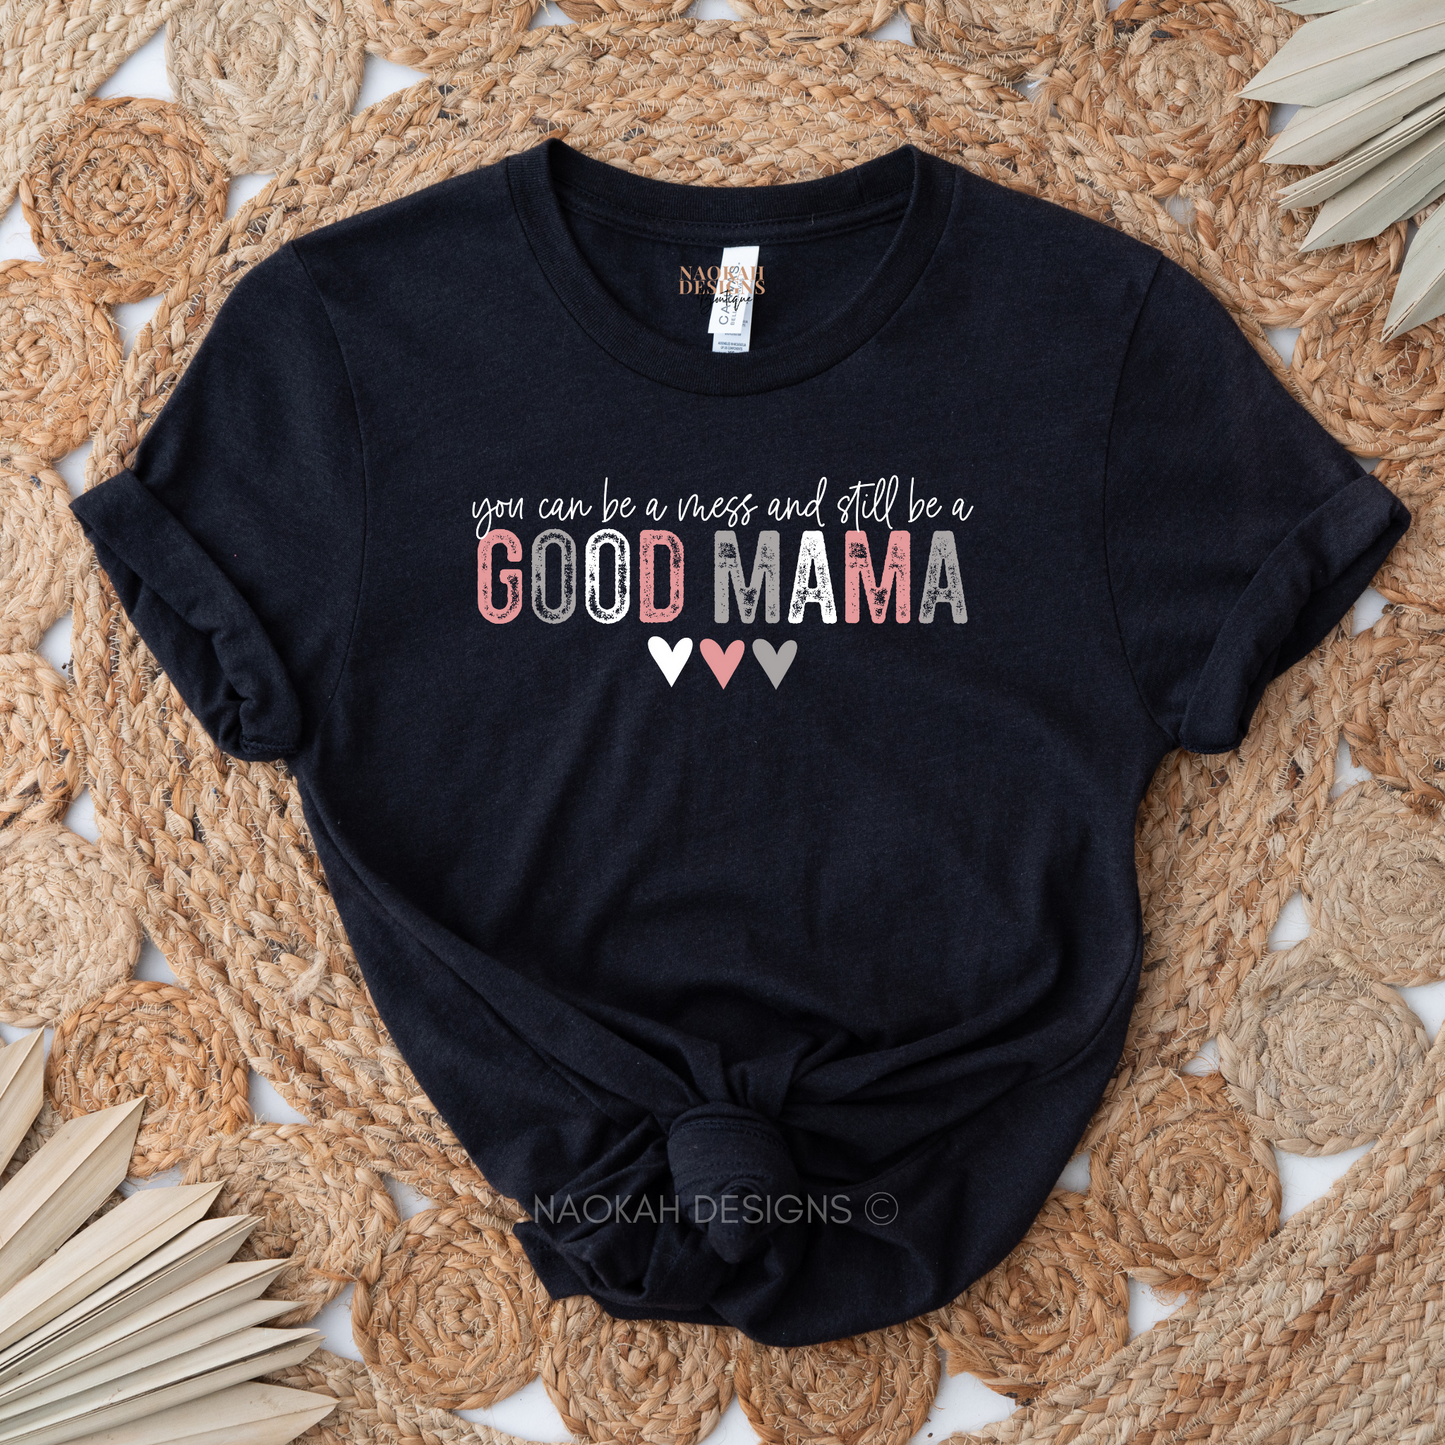 you can be a mess and still be a good mama shirt, tired moms club shirt, mama tried shirt, thou shalt not try me shirt, hot mess tee